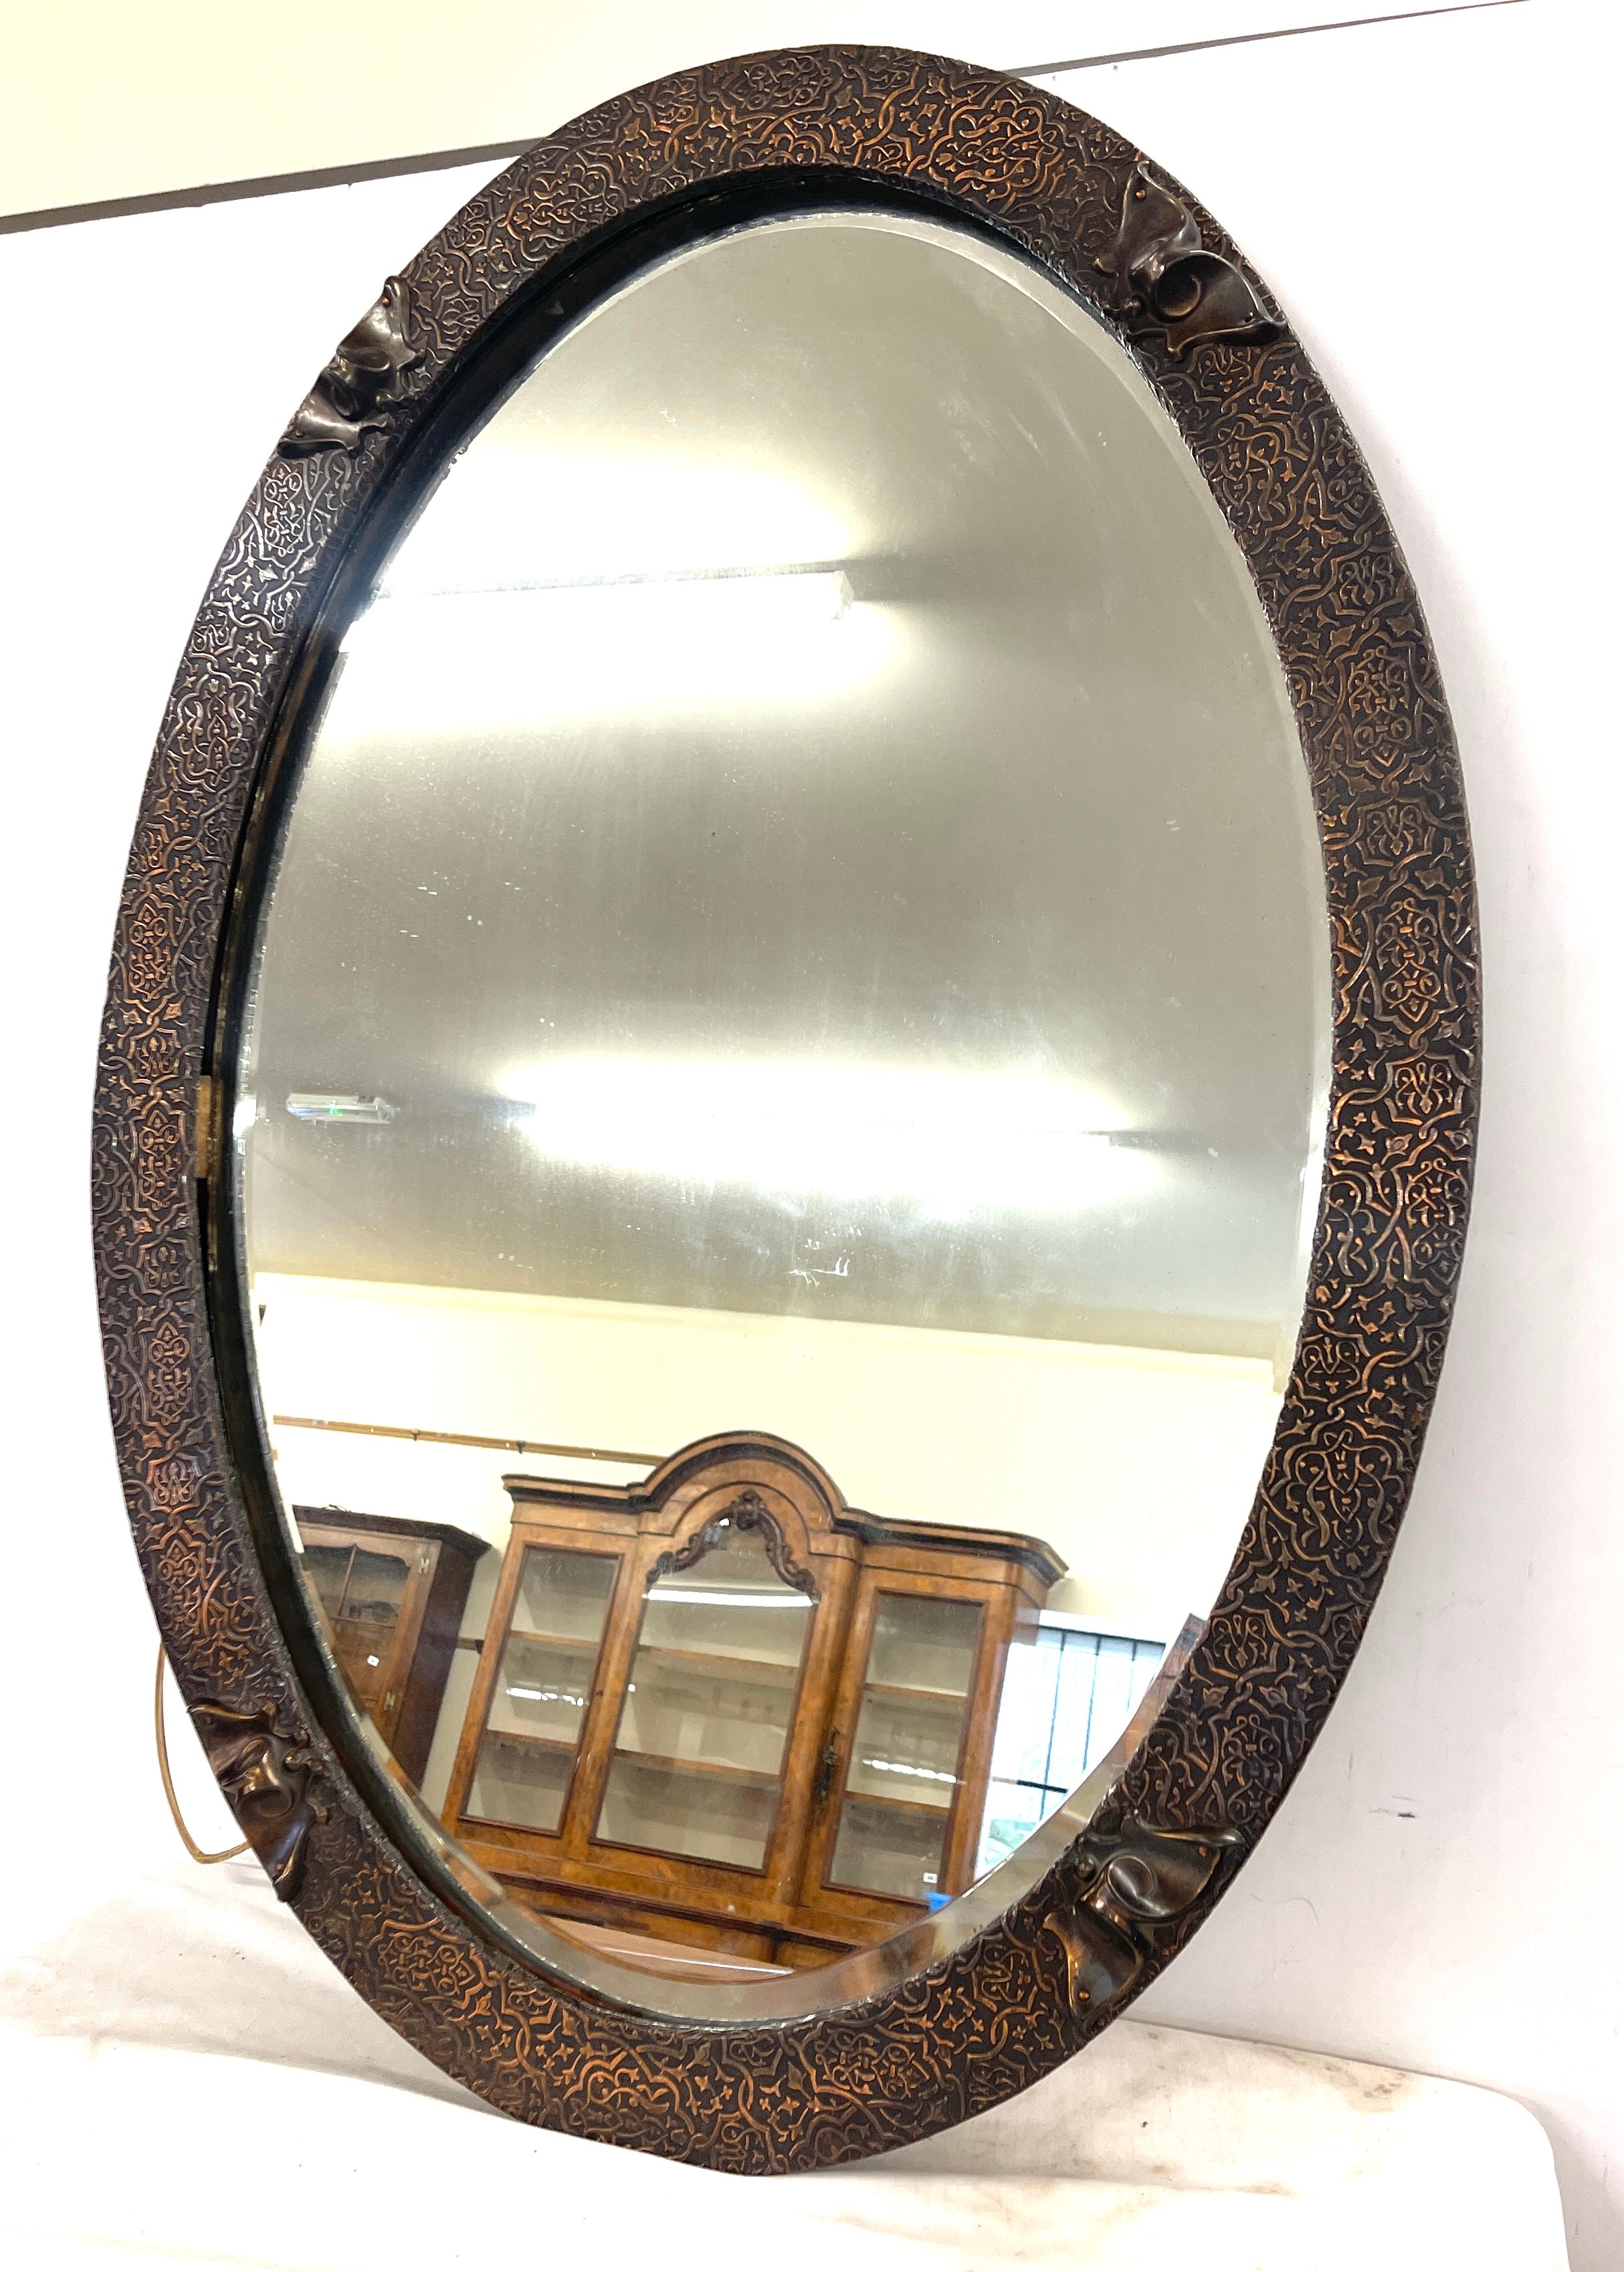 Oriental oval framed mirror measures approx measures approx 34 inches by 23 inches - Bild 2 aus 2